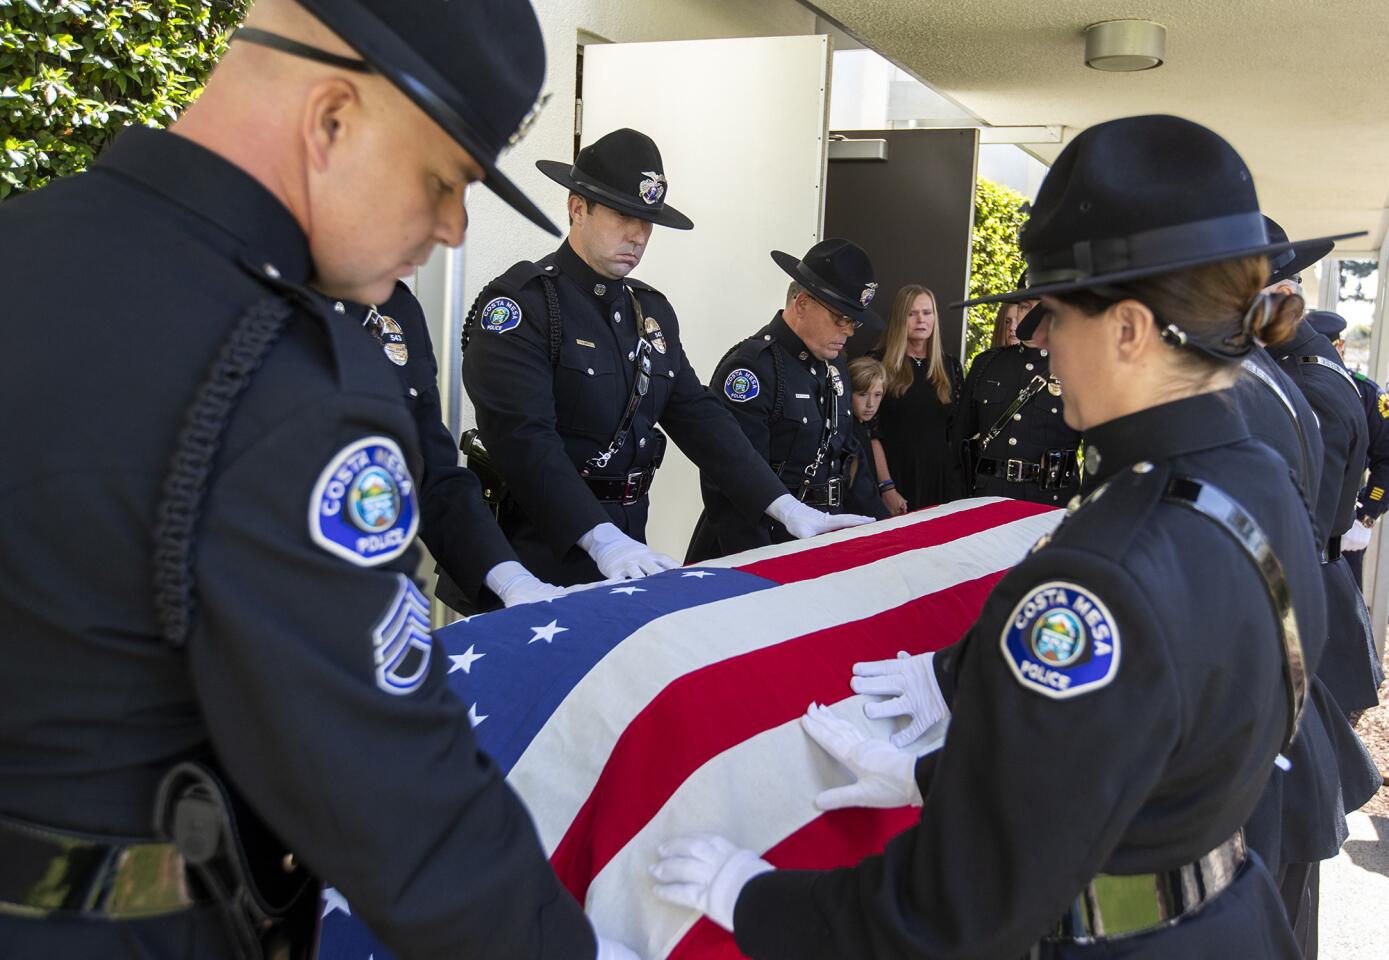 Pallbearers place an American flag over the casket of Costa Mesa police Officer Oscar Reyes as his wife, Jennifer, son Brandon, 10, and daughter Ashley, 15, look on during Reyes' funeral at Christ Cathedral in Garden Grove on Friday.